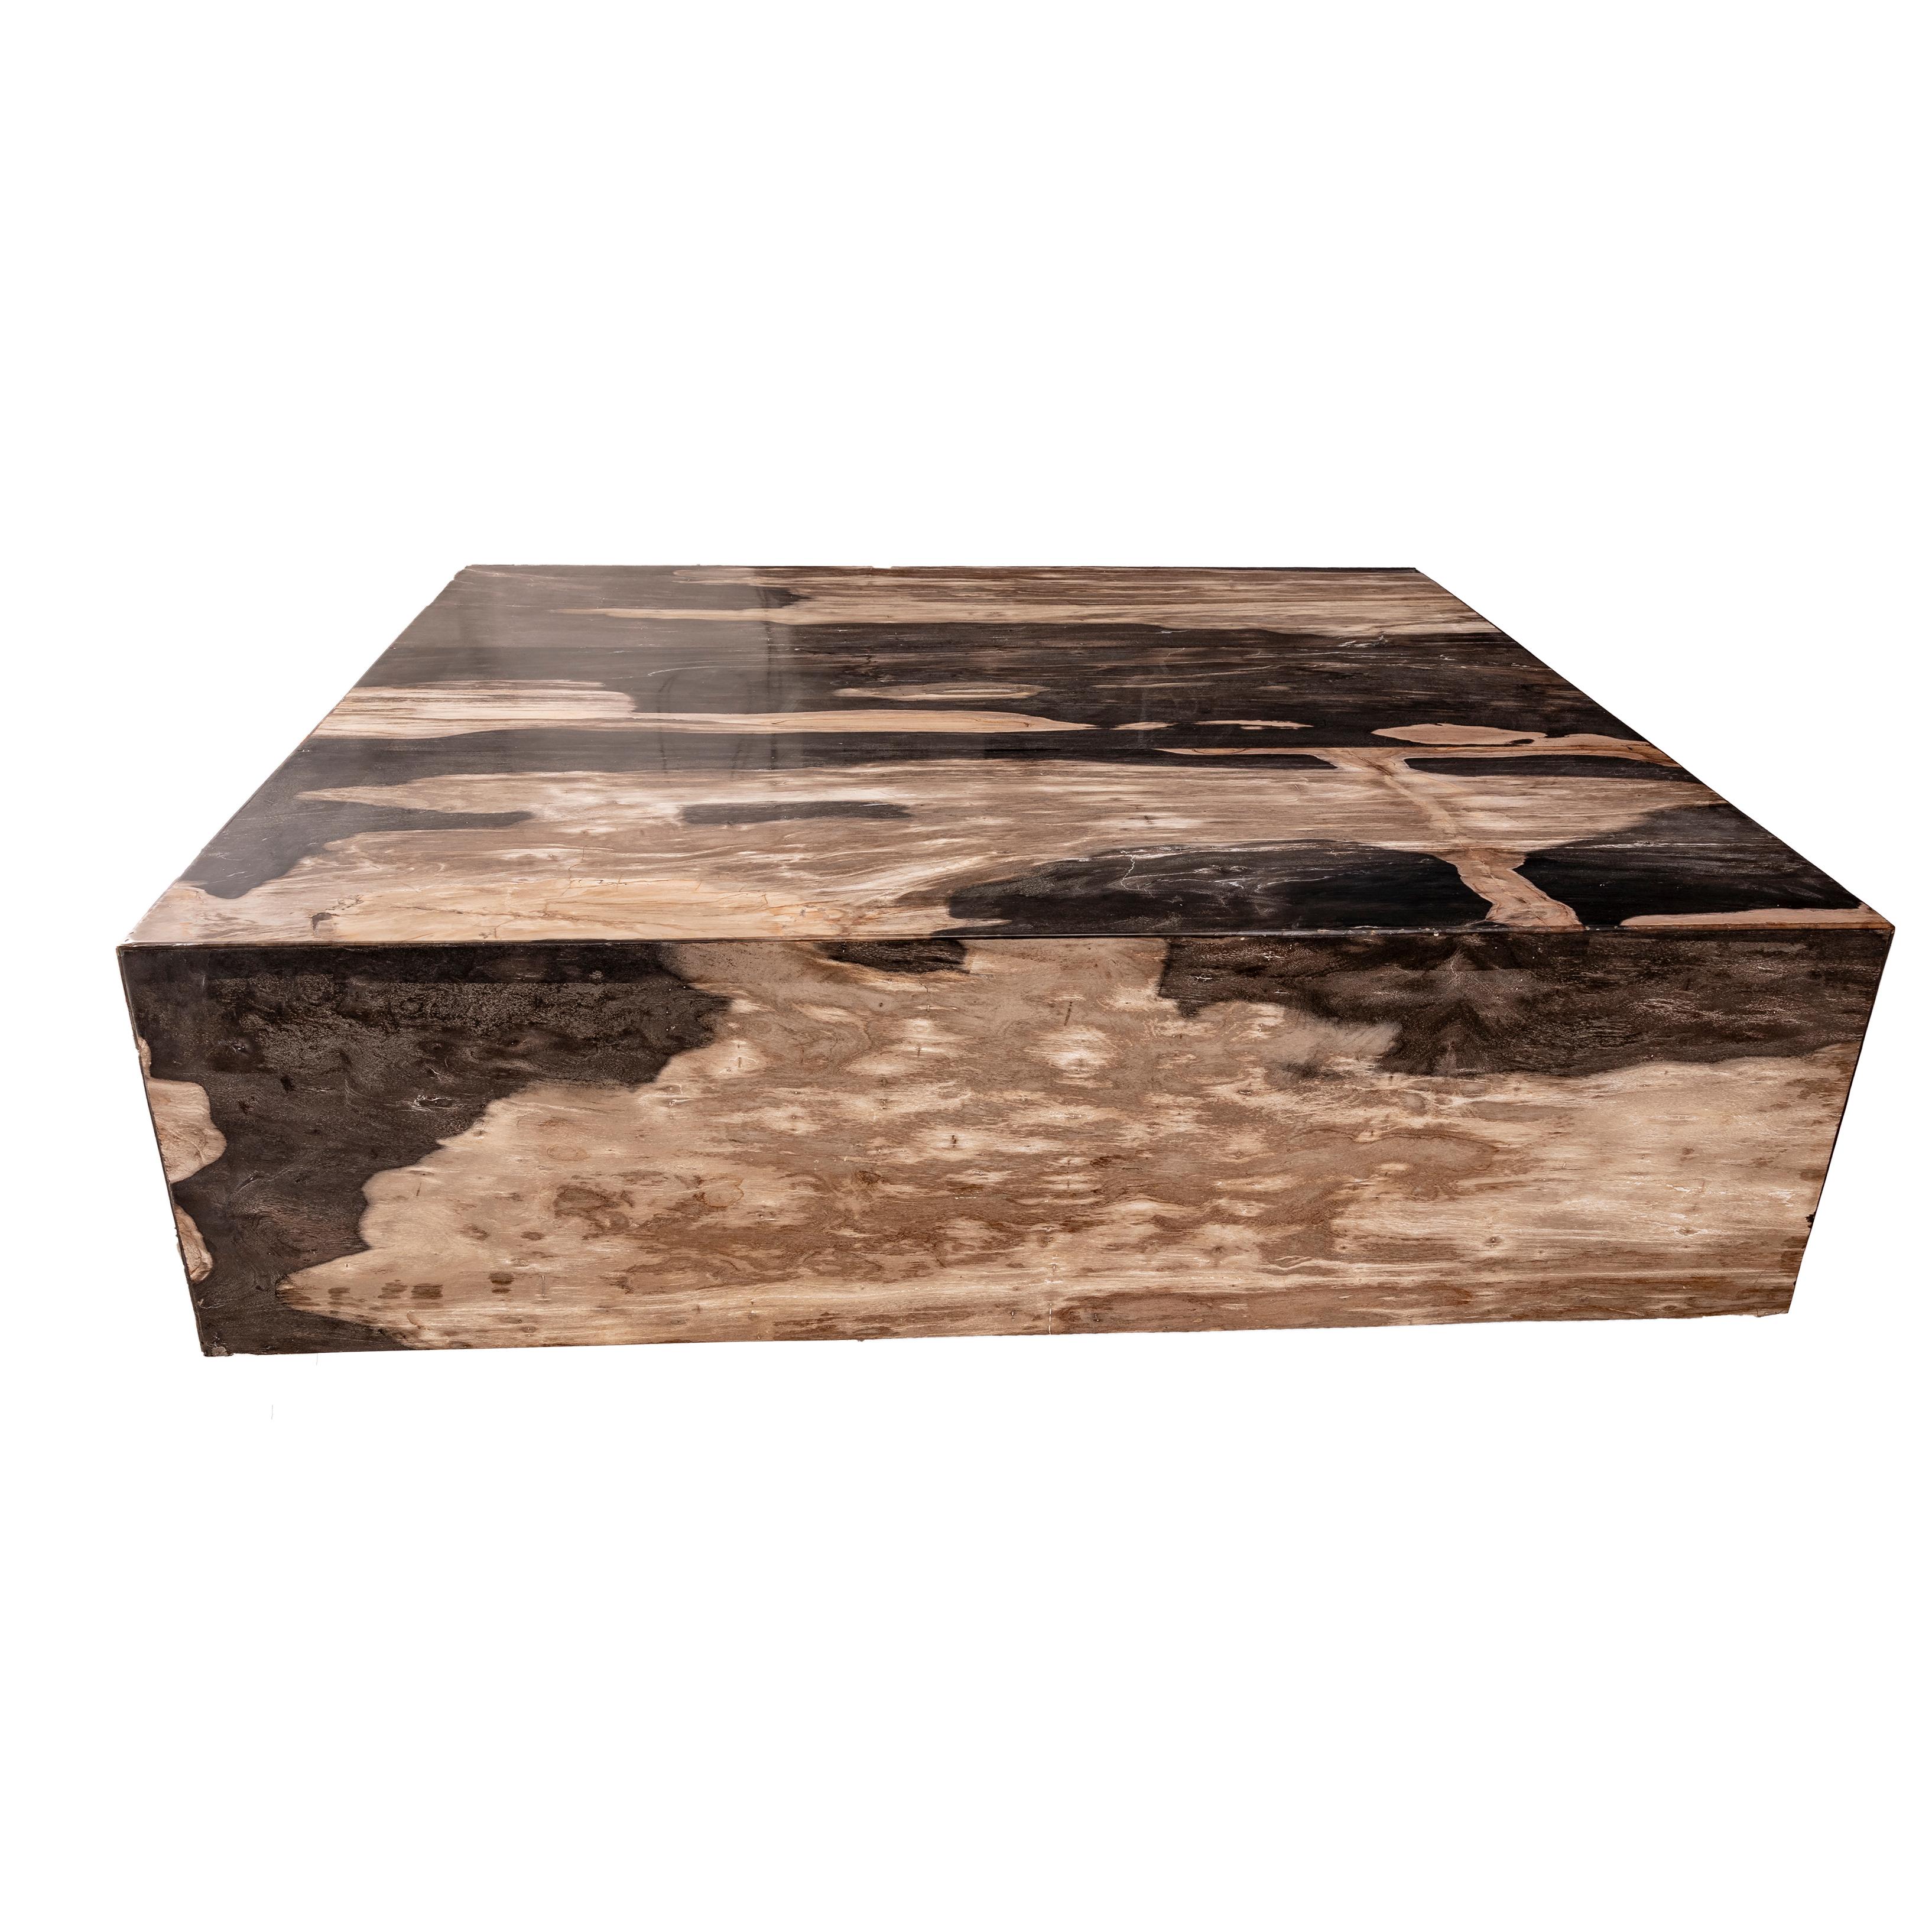 Polished Square Center or Coffee Table, Petrified Wood